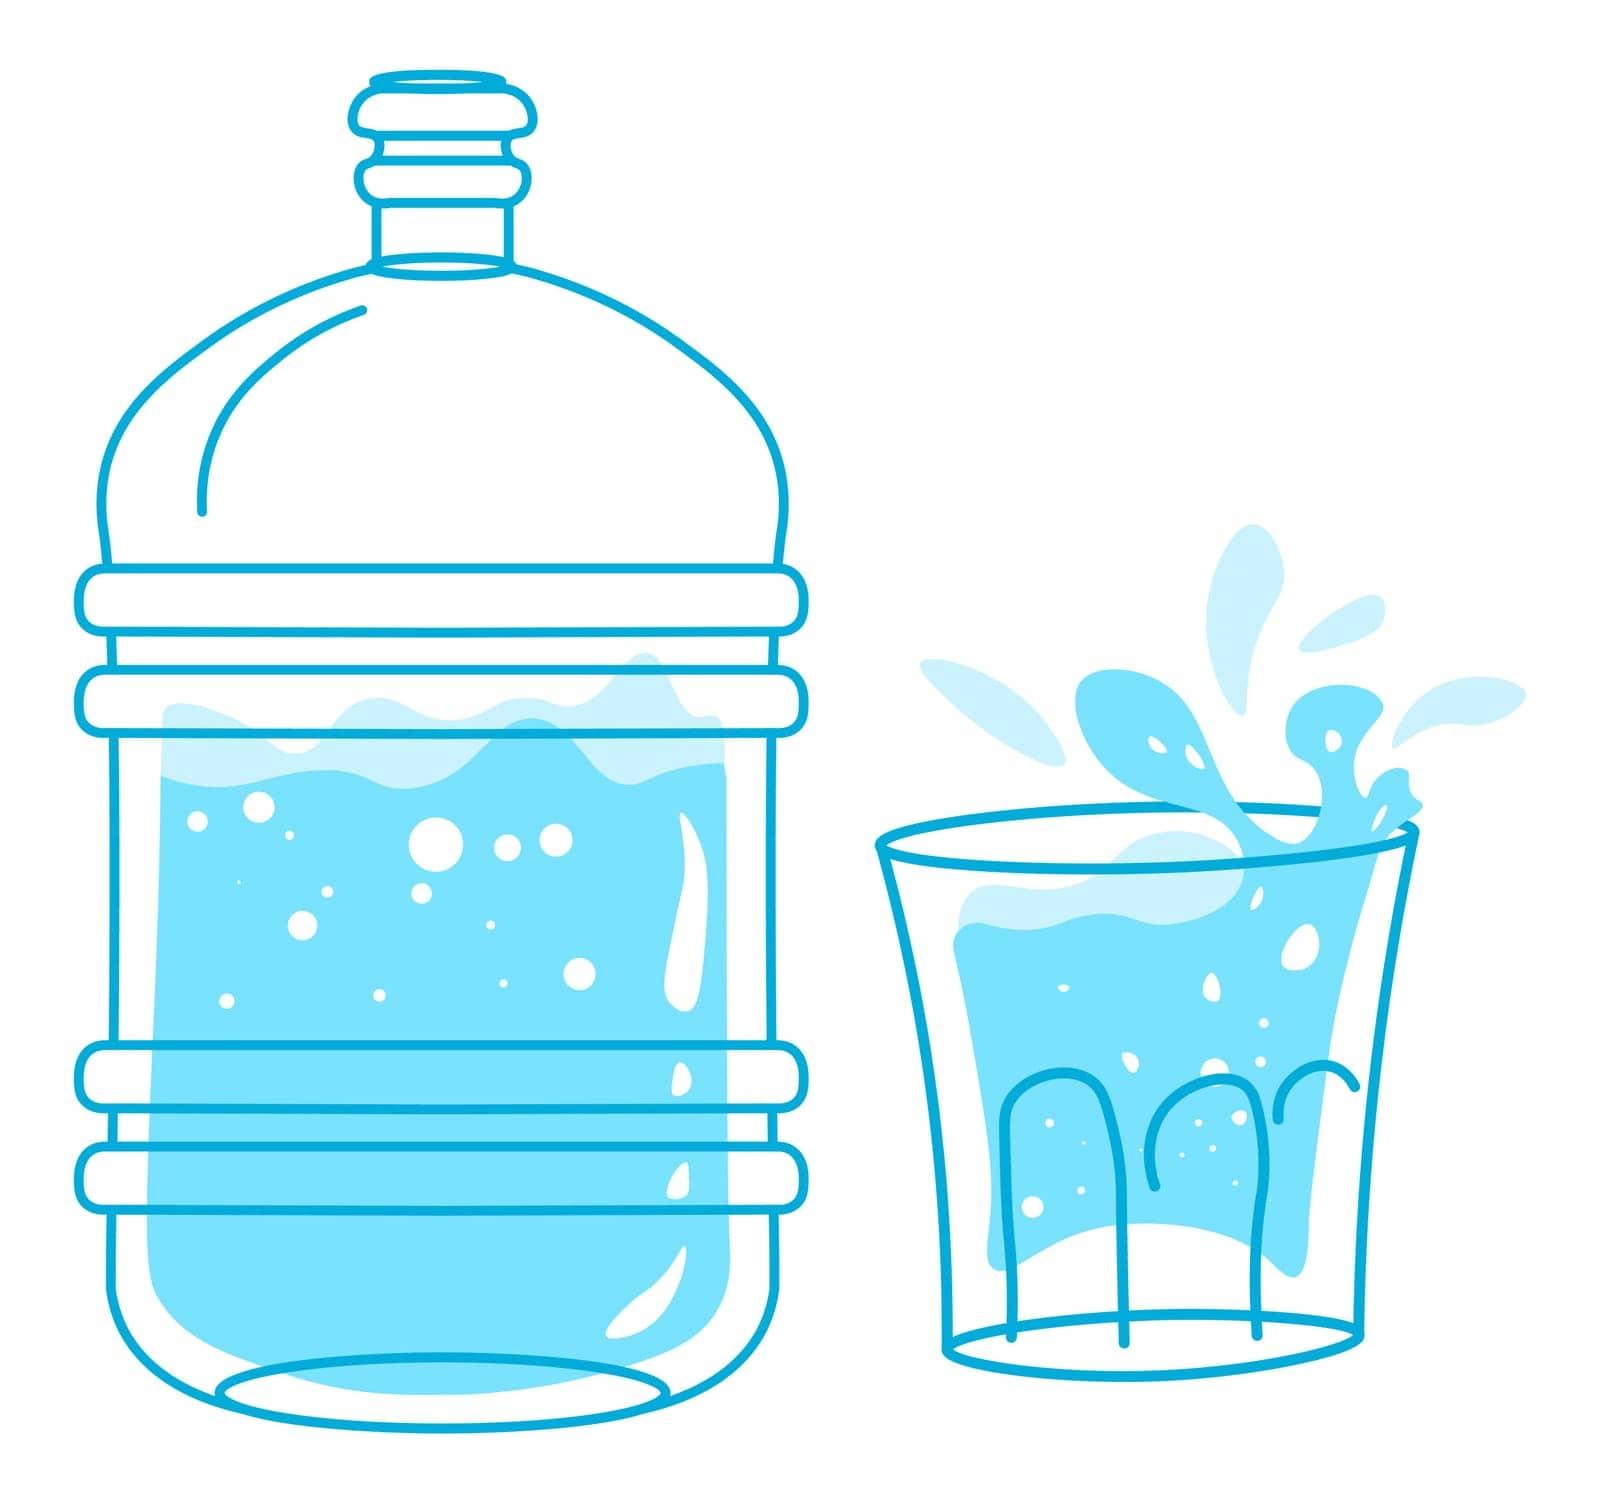 Purified water in bottle, isolated cup of clean drink with splashes. Beverage served in mug, restaurant or cafe. Moisturizing and killing thirst. Healthcare and wellbeing. Vector in flat style